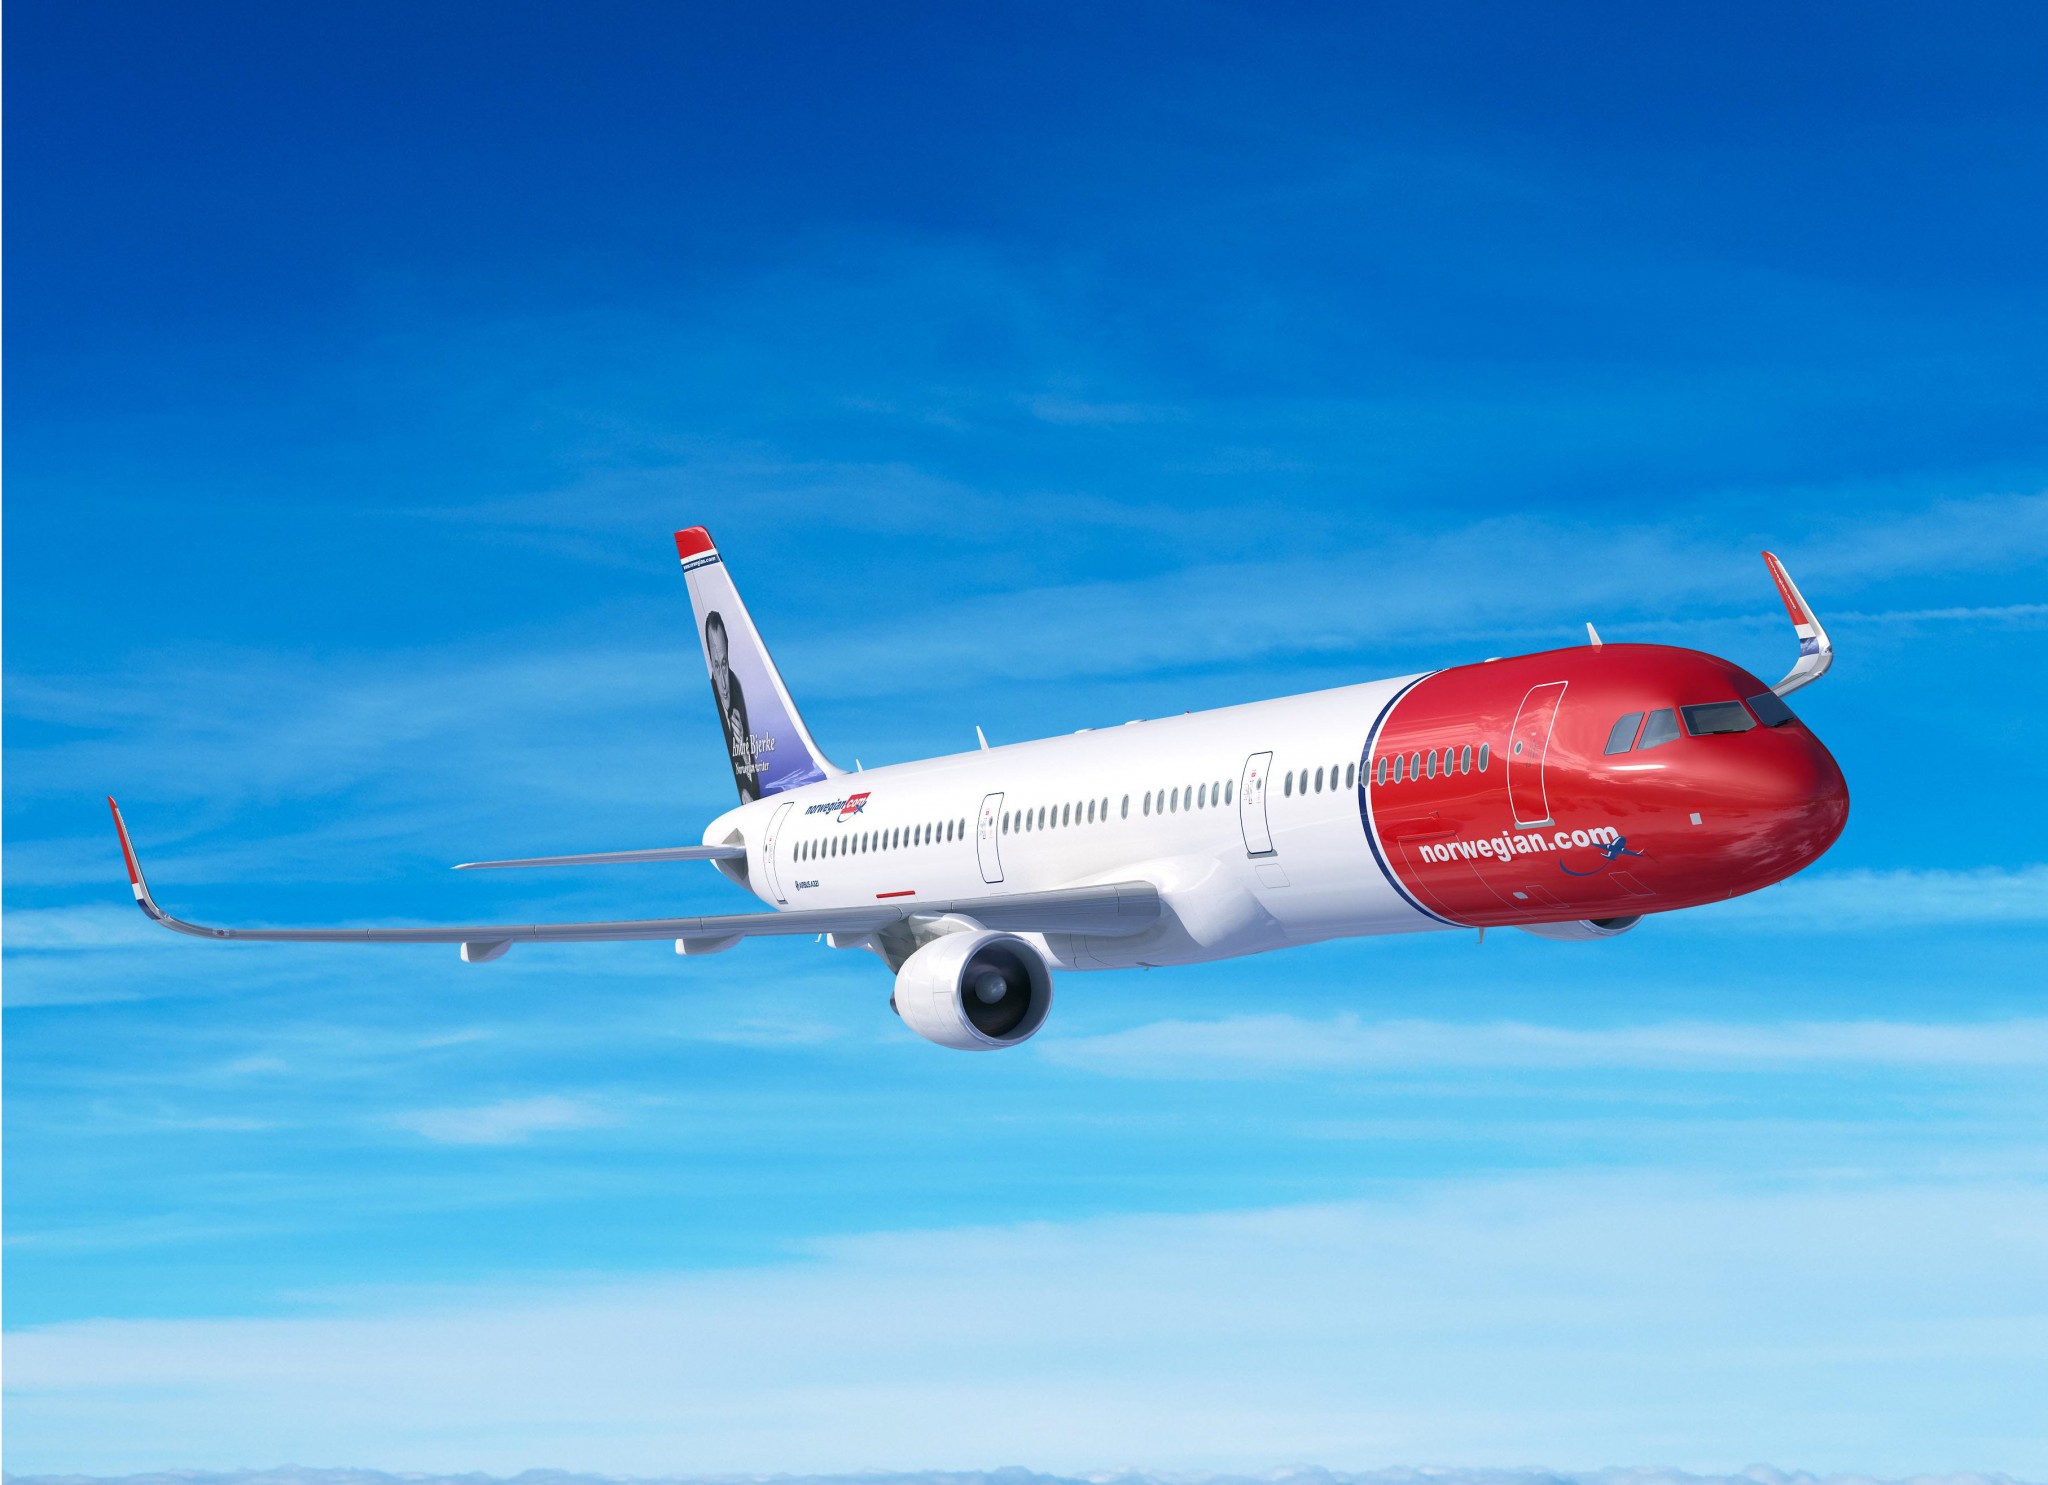 Norwegian reports 15 per cent passenger growth in April